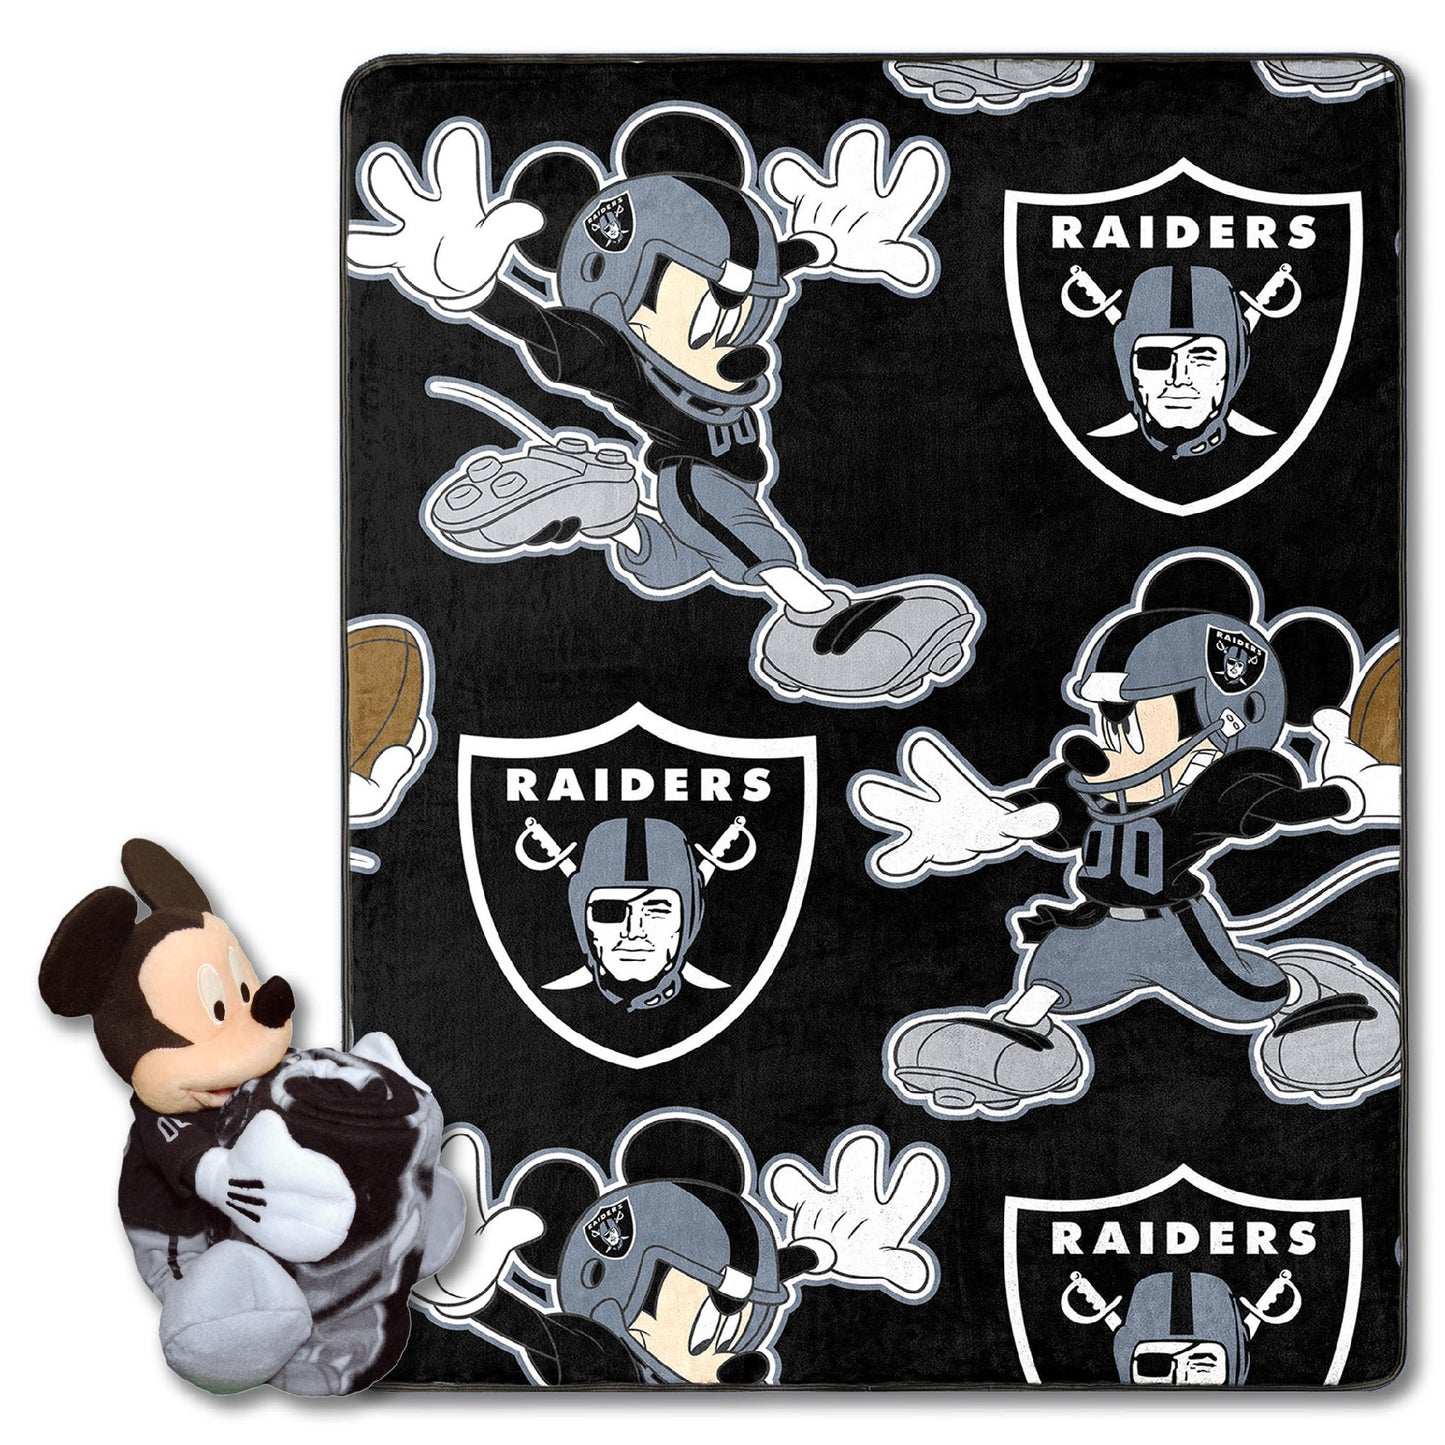 Raiders OFFICIAL NFL & Disney's Mickey Mouse Character Hugger Pillow & Silk Touch Throw Set;  40" x 50"